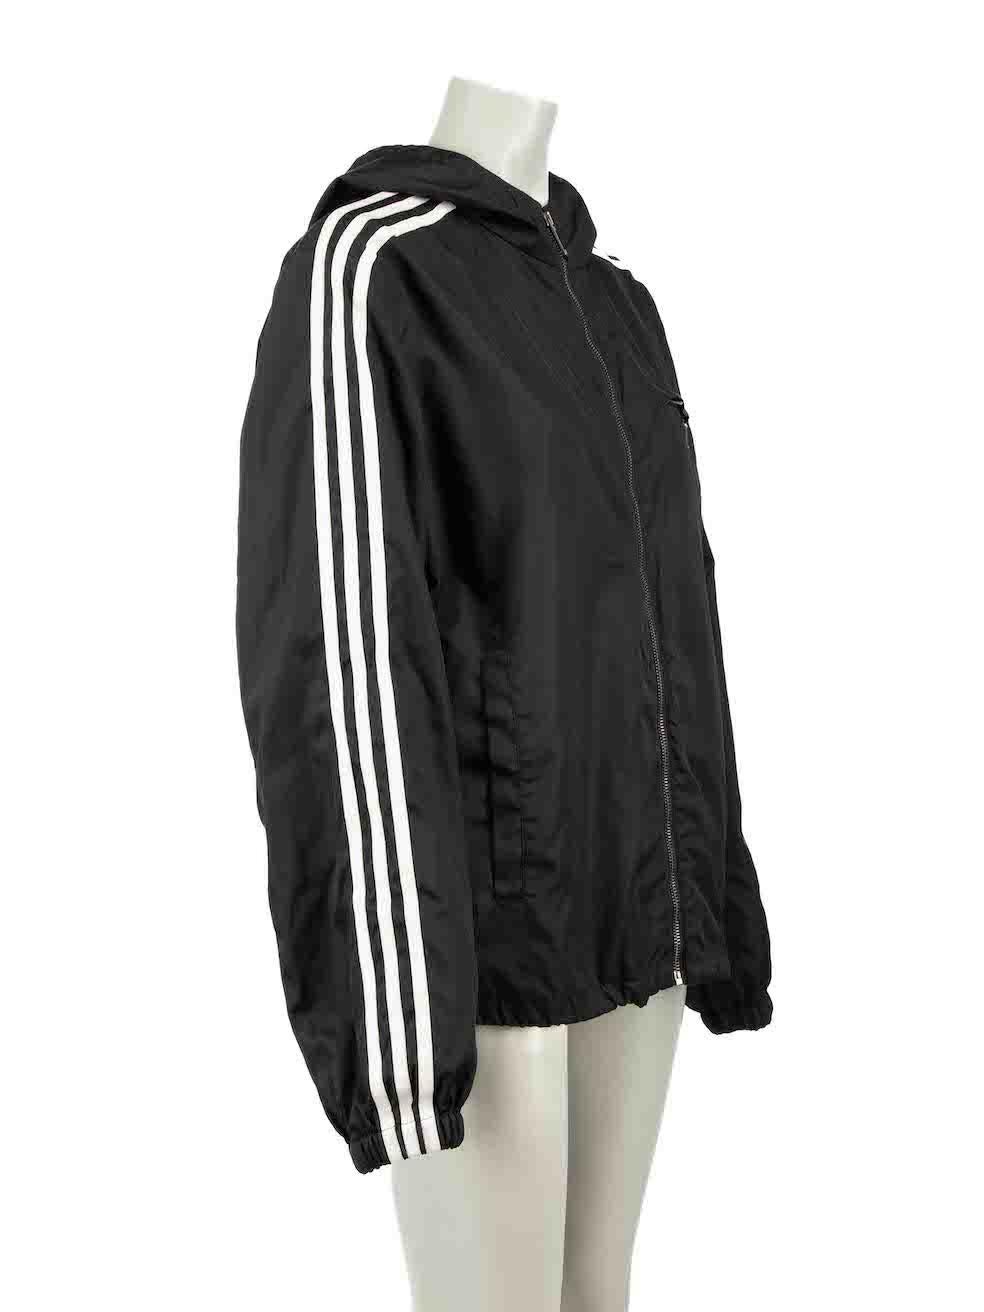 CONDITION is Very good. Hardly any visible wear to jacket is evident on this used Prada X Adidas designer resale item.
 
Details
Unisex
Black
Re-nylon
Track jacket
Front zip closure
Striped accent on sleeves
Hooded with drawstring
2x Front side